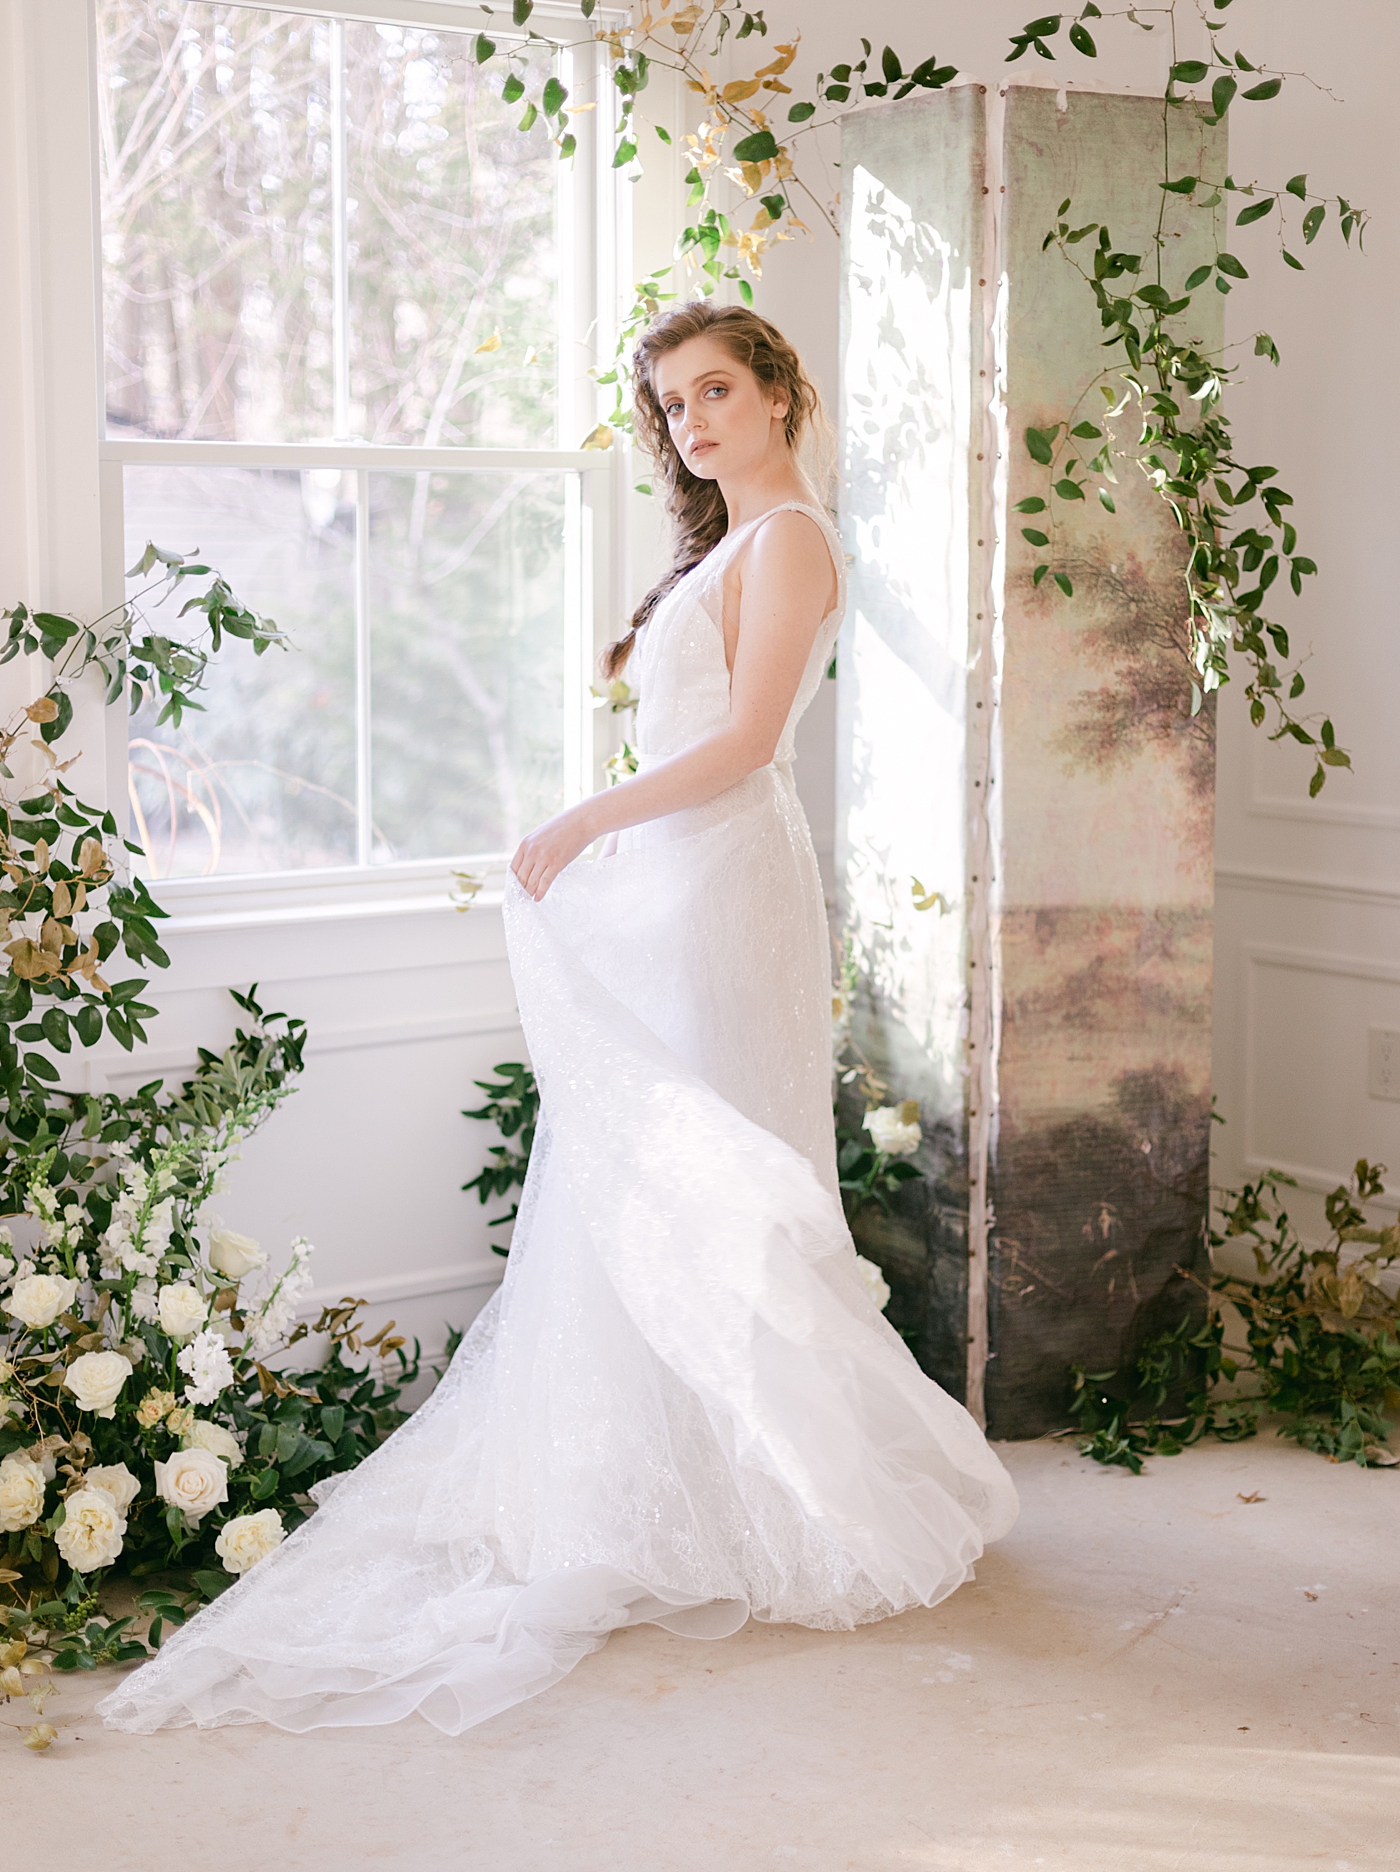 Bride near a window holding her dress | Photo by Hope Helmuth Photograpghy